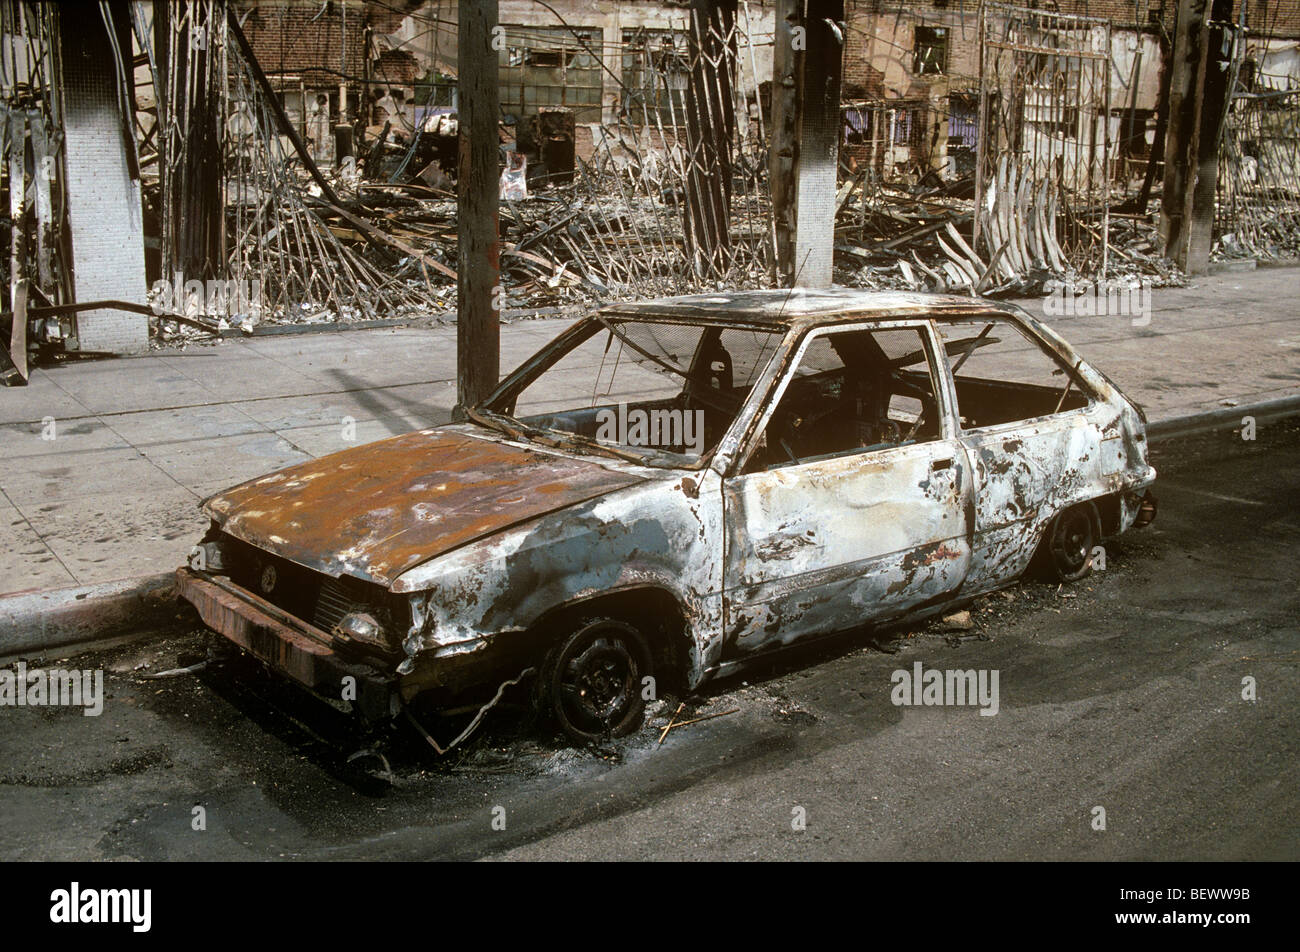 Aftermath of Riots Stock Photo